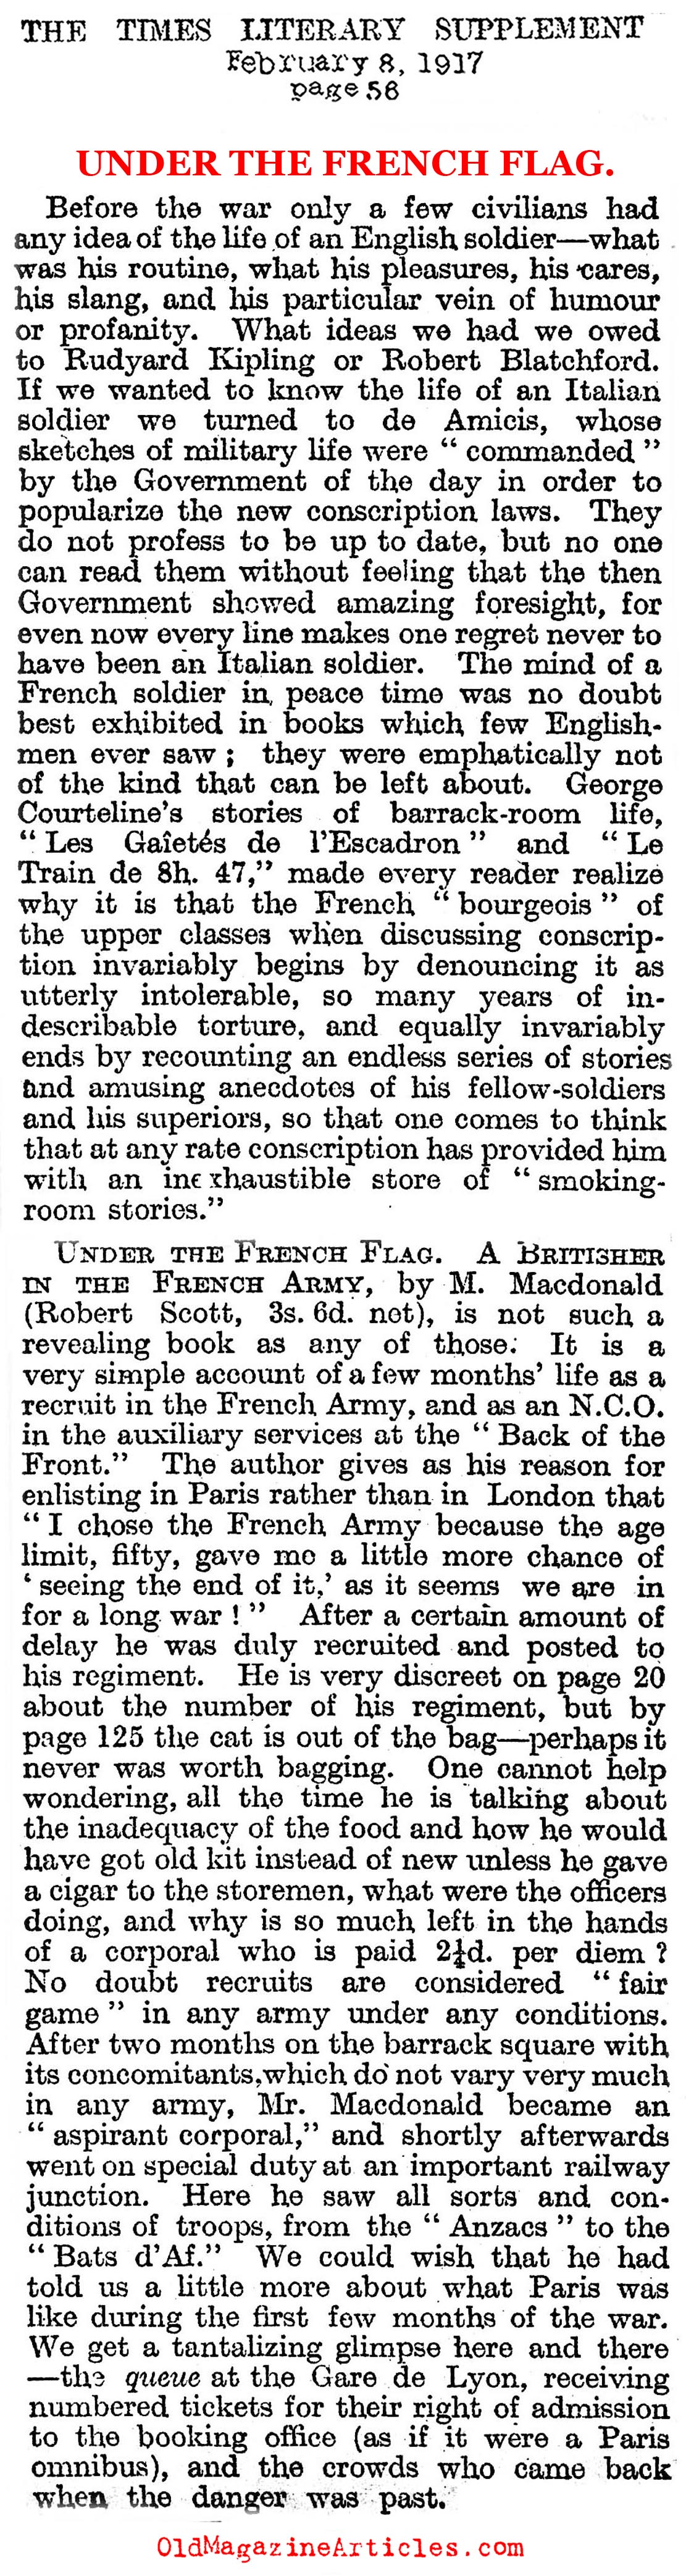 An Englishman in the French Army (Times Literary Supplement, 1917)